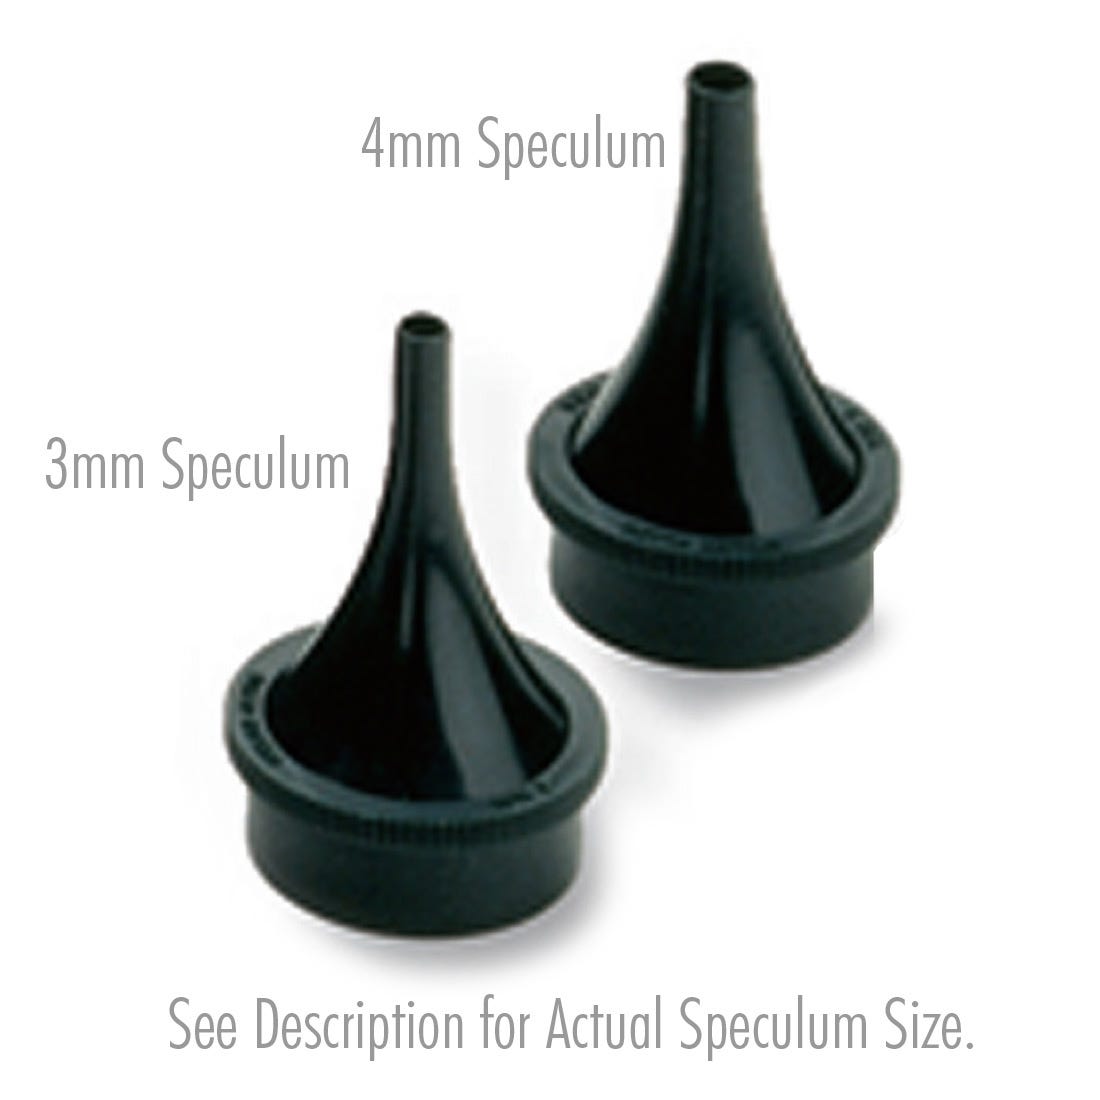 Otoscope Specula for Pneumatic and Consulting Otoscopes - 3mm Speculum Tip